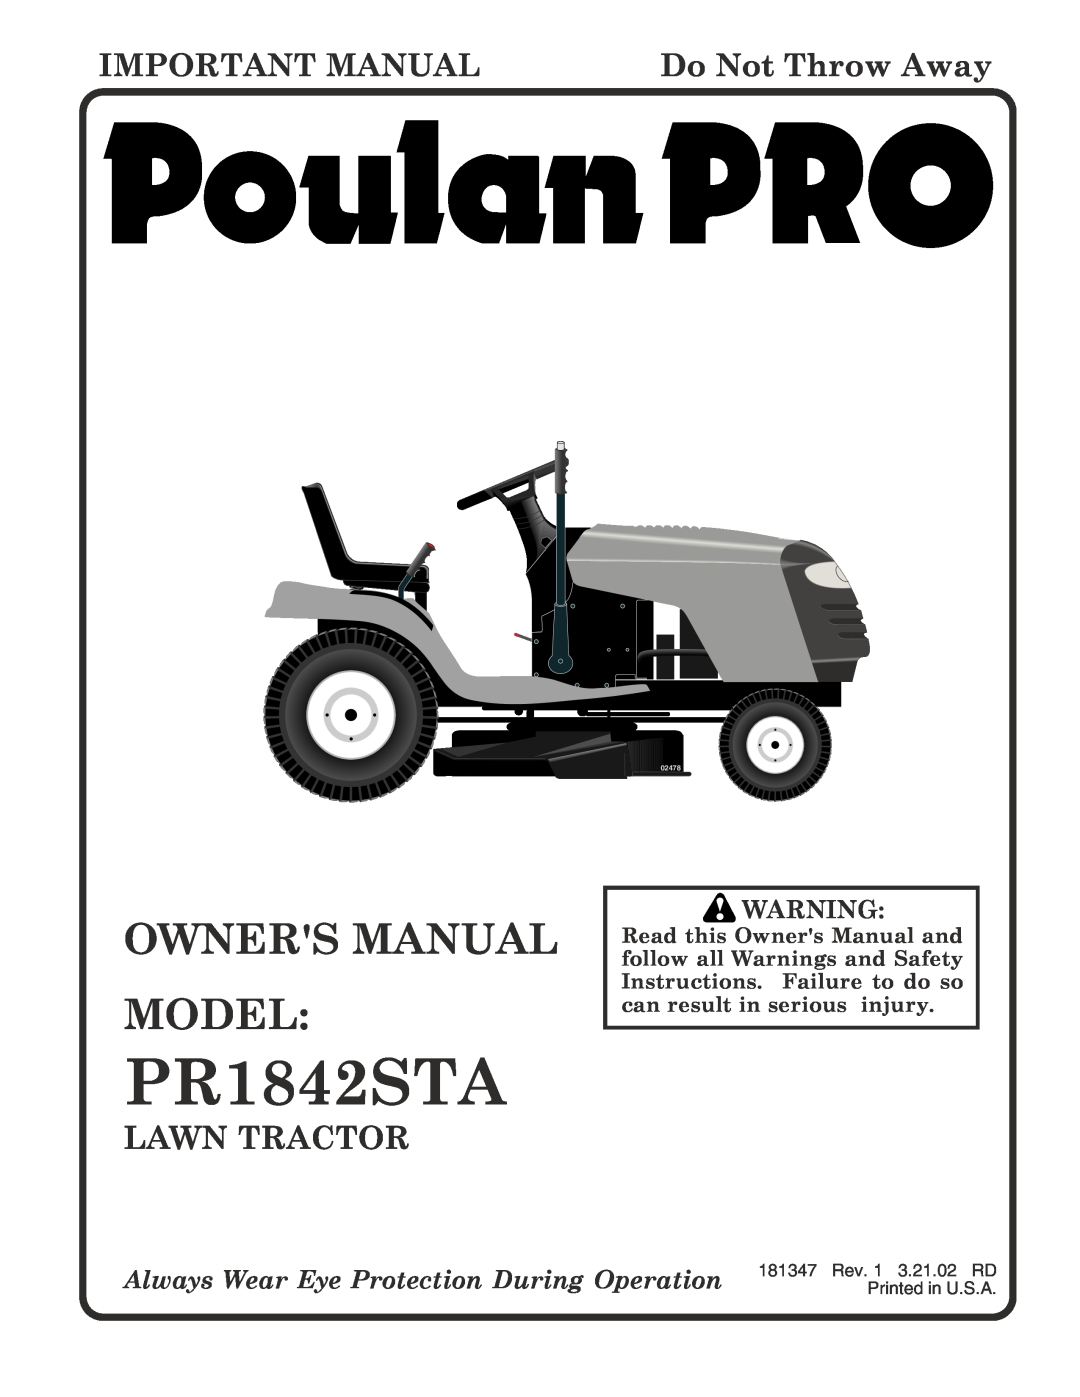 Poulan 181347 owner manual PR1842STA, Important Manual, Do Not Throw Away, Lawn Tractor, 02478 